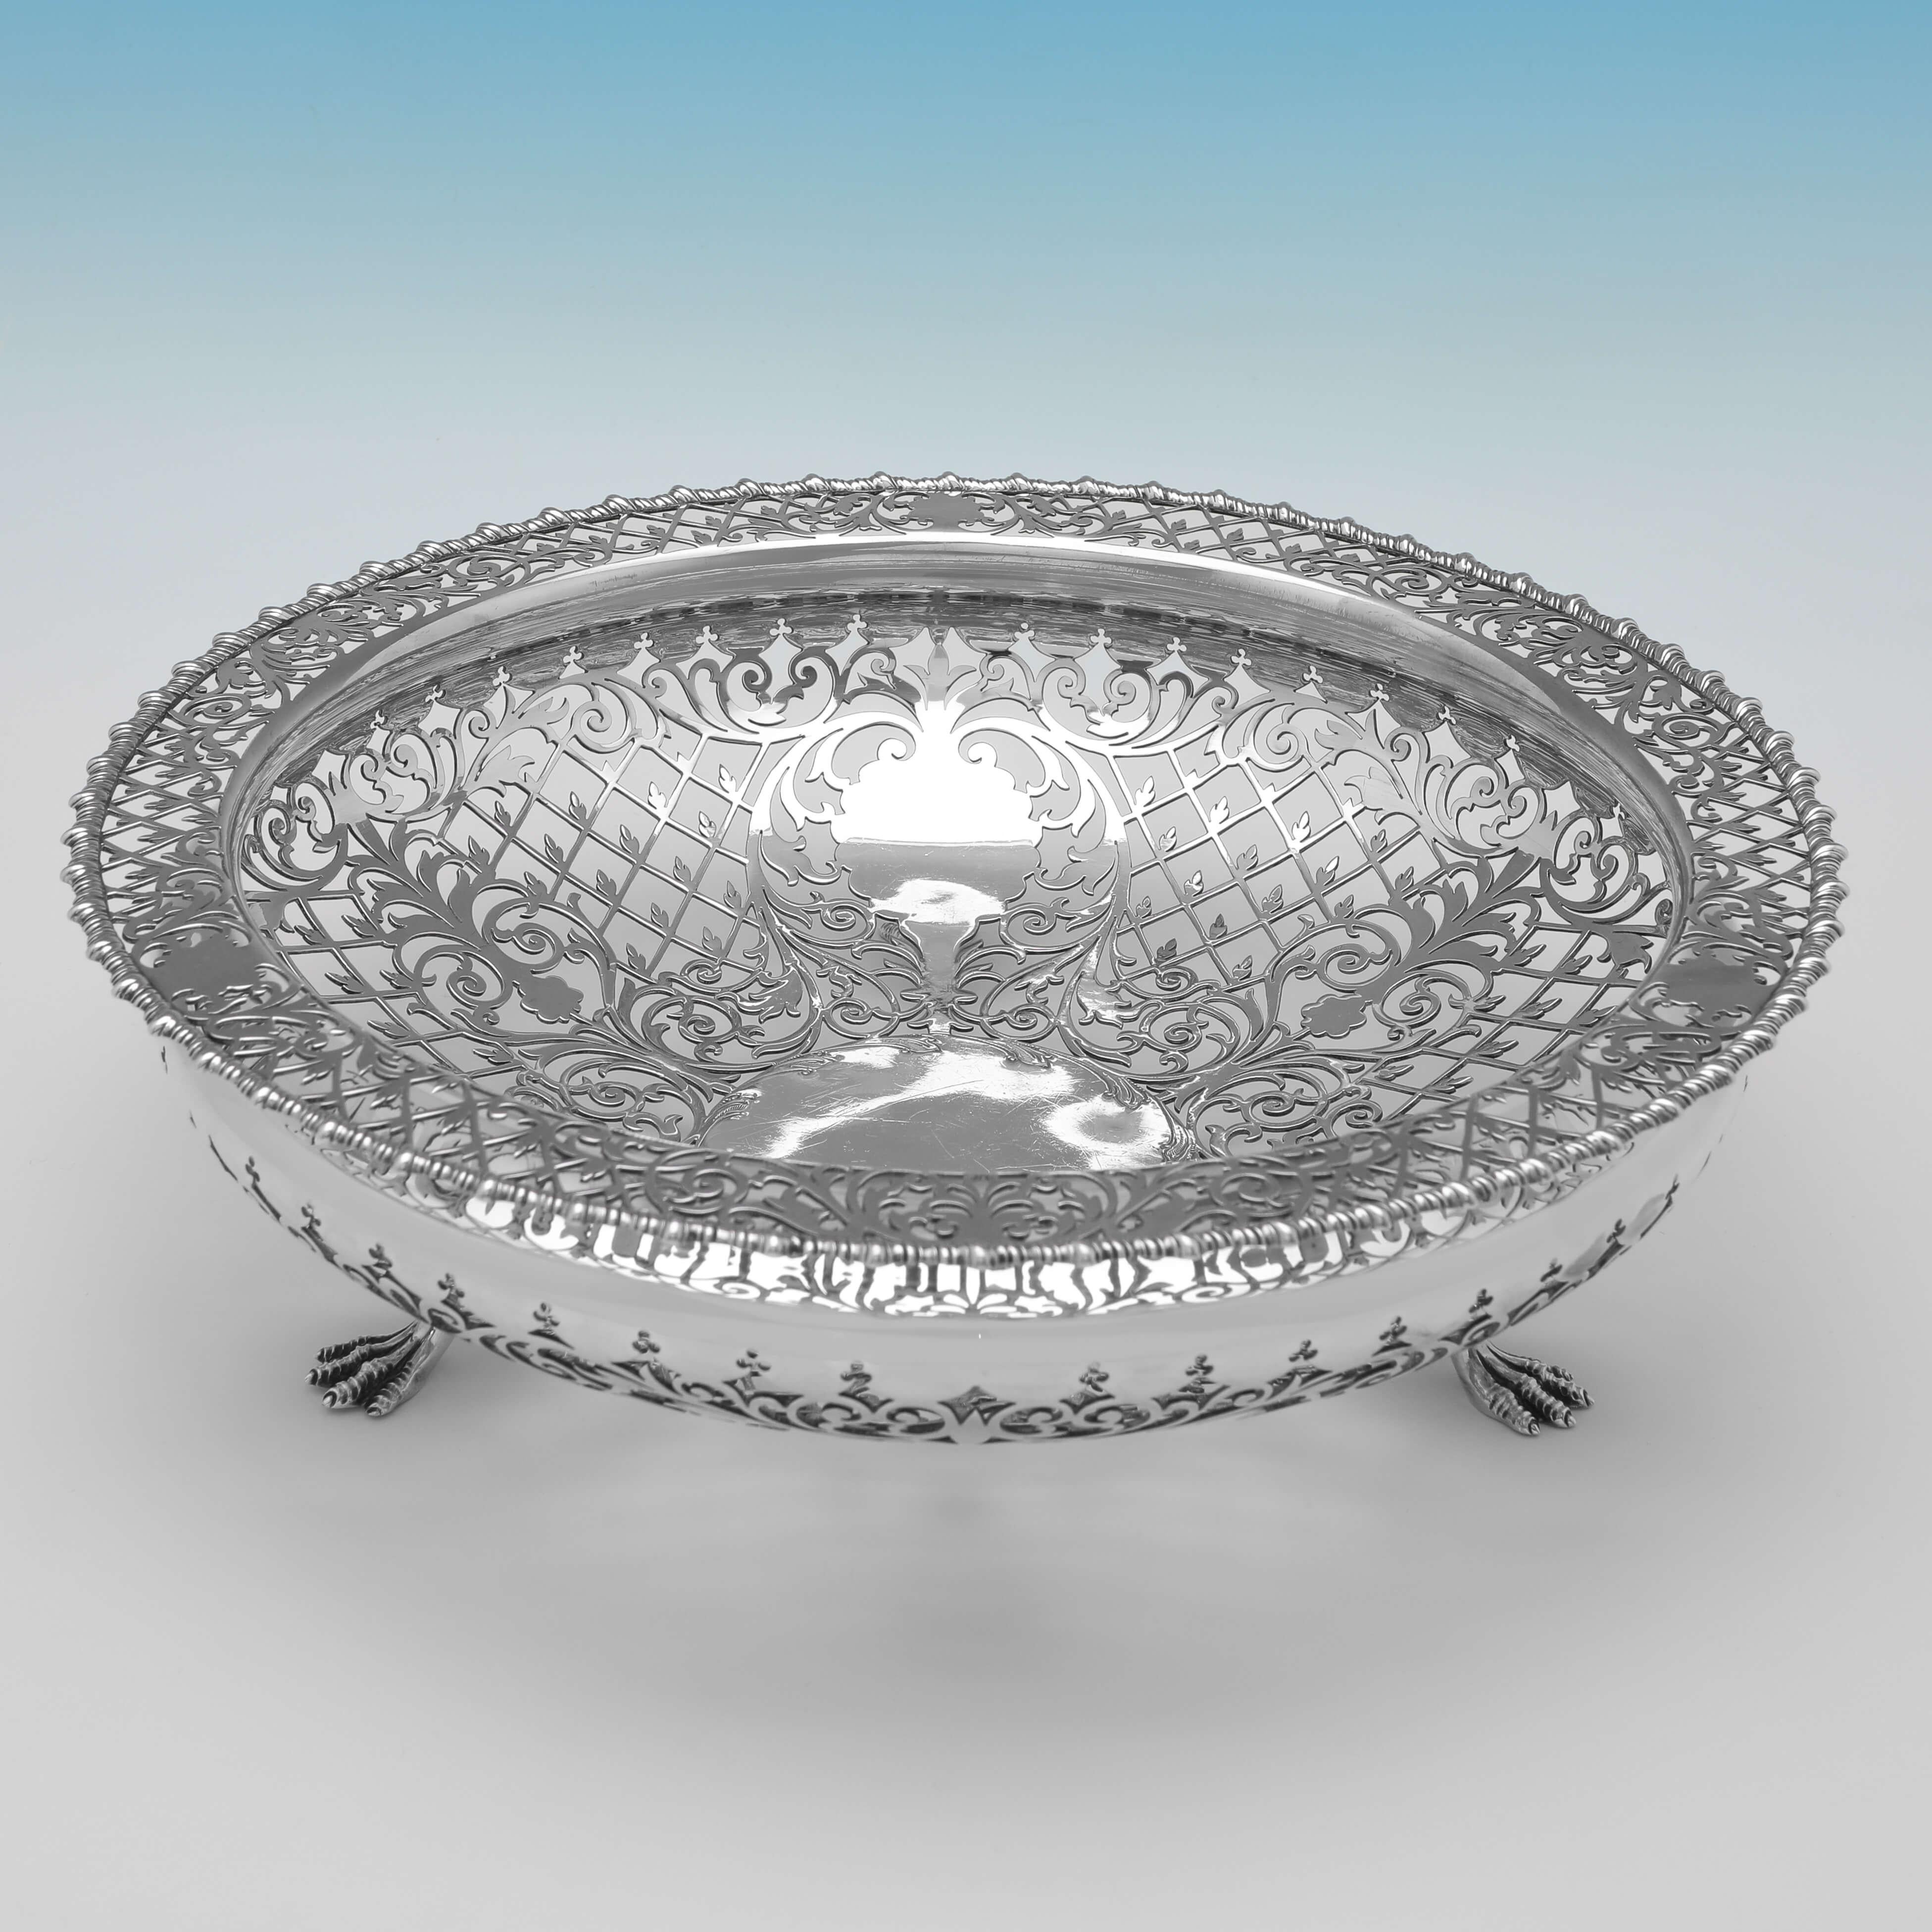 Hallmarked in Sheffield in 1905 by James Dixon & Sons, this attractive, Edwardian, Antique Sterling Silver Dish, stands on 3 paw feet, and features wonderfully pierced decoration. 

The dish measures 3.5